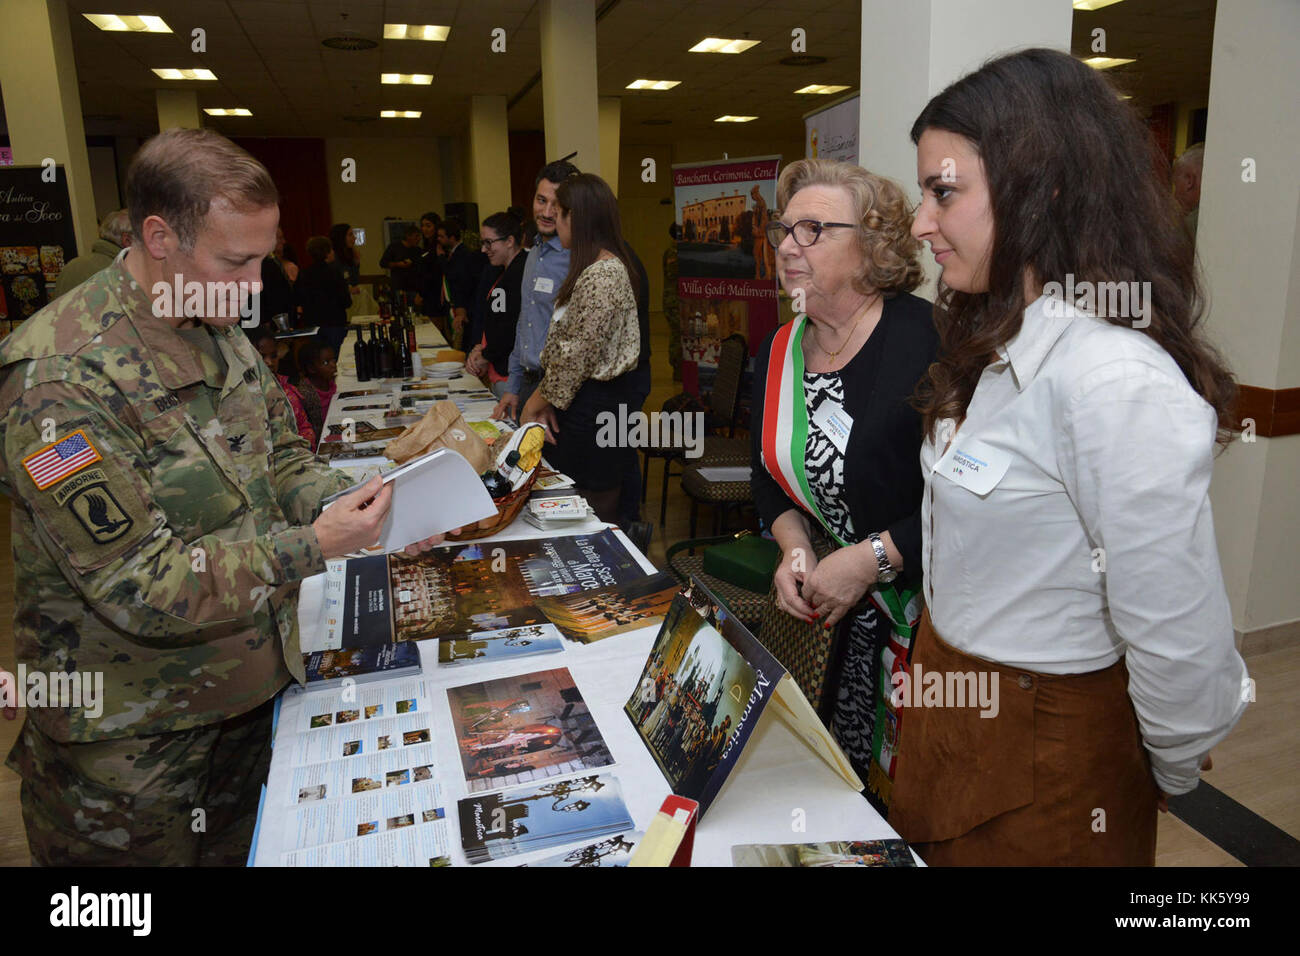 U.S. Col. Eric M. Berdy, U.S. Army Garrison Italy commander, visits with the members of Marostica community exposure, during the Meet the Mayors event at the Golden Lion Conference Center on Caserma Ederle, Vicenza, Italy, Nov. 8, 2017.   The event is an informal fair that hosts mayors, council members, and cultural and tourism representatives from Italian townships in the Vicenza and Padova provinces. (U.S. Army Photo by Paolo Bovo) Stock Photo